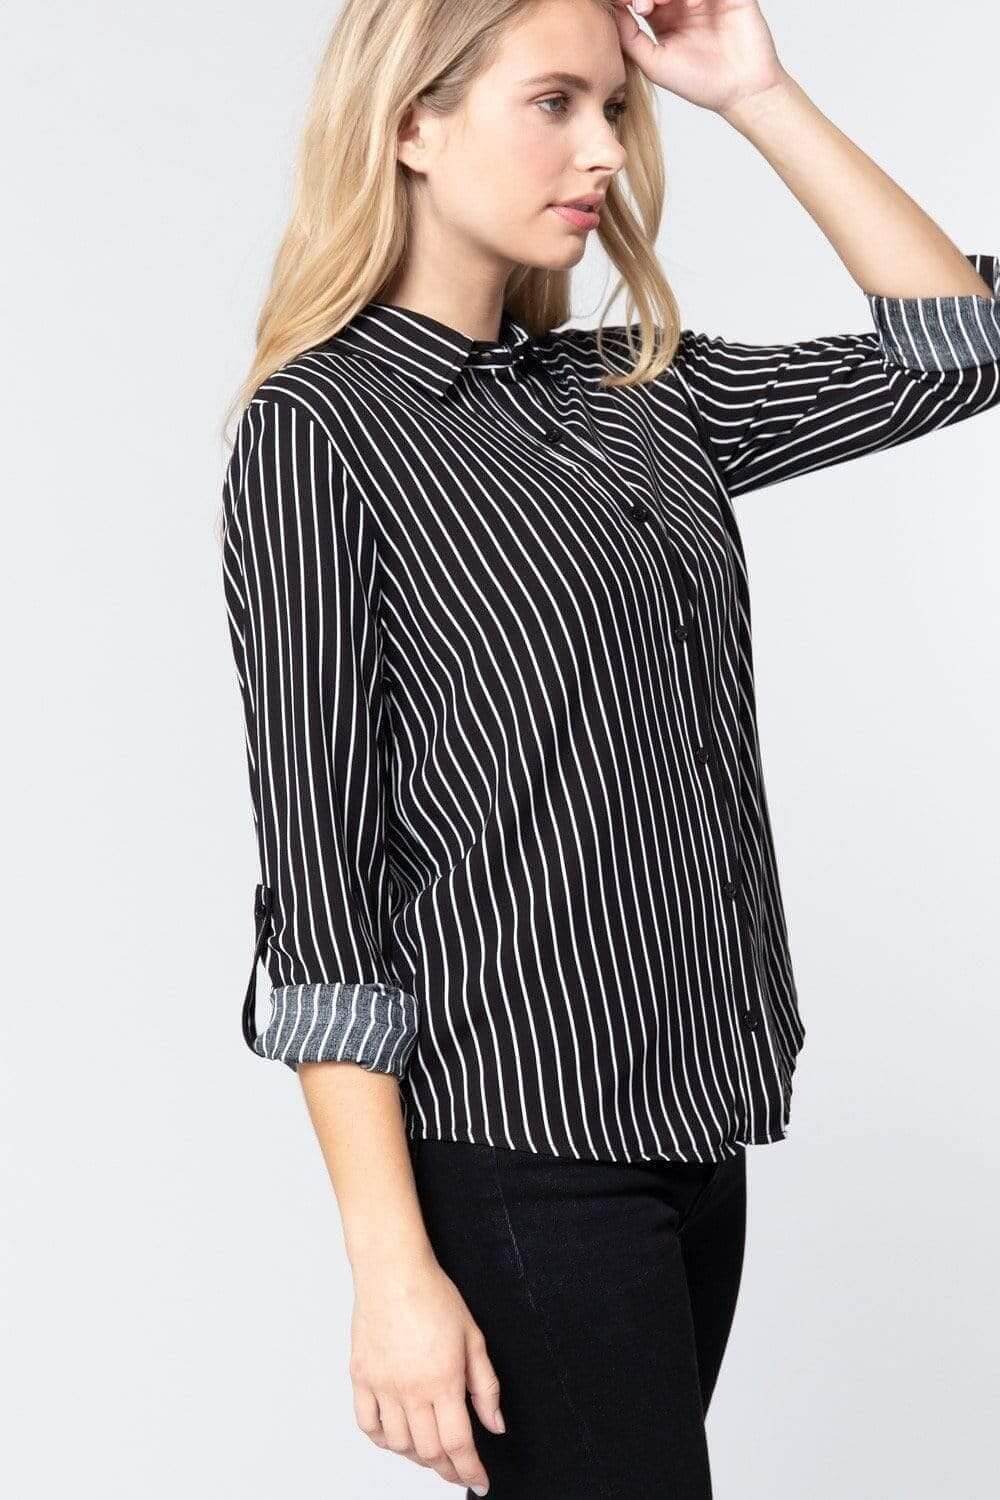 Black-White Roll Up Long Sleeve Stripe Shirt - Shopping Therapy Shirts & Tops